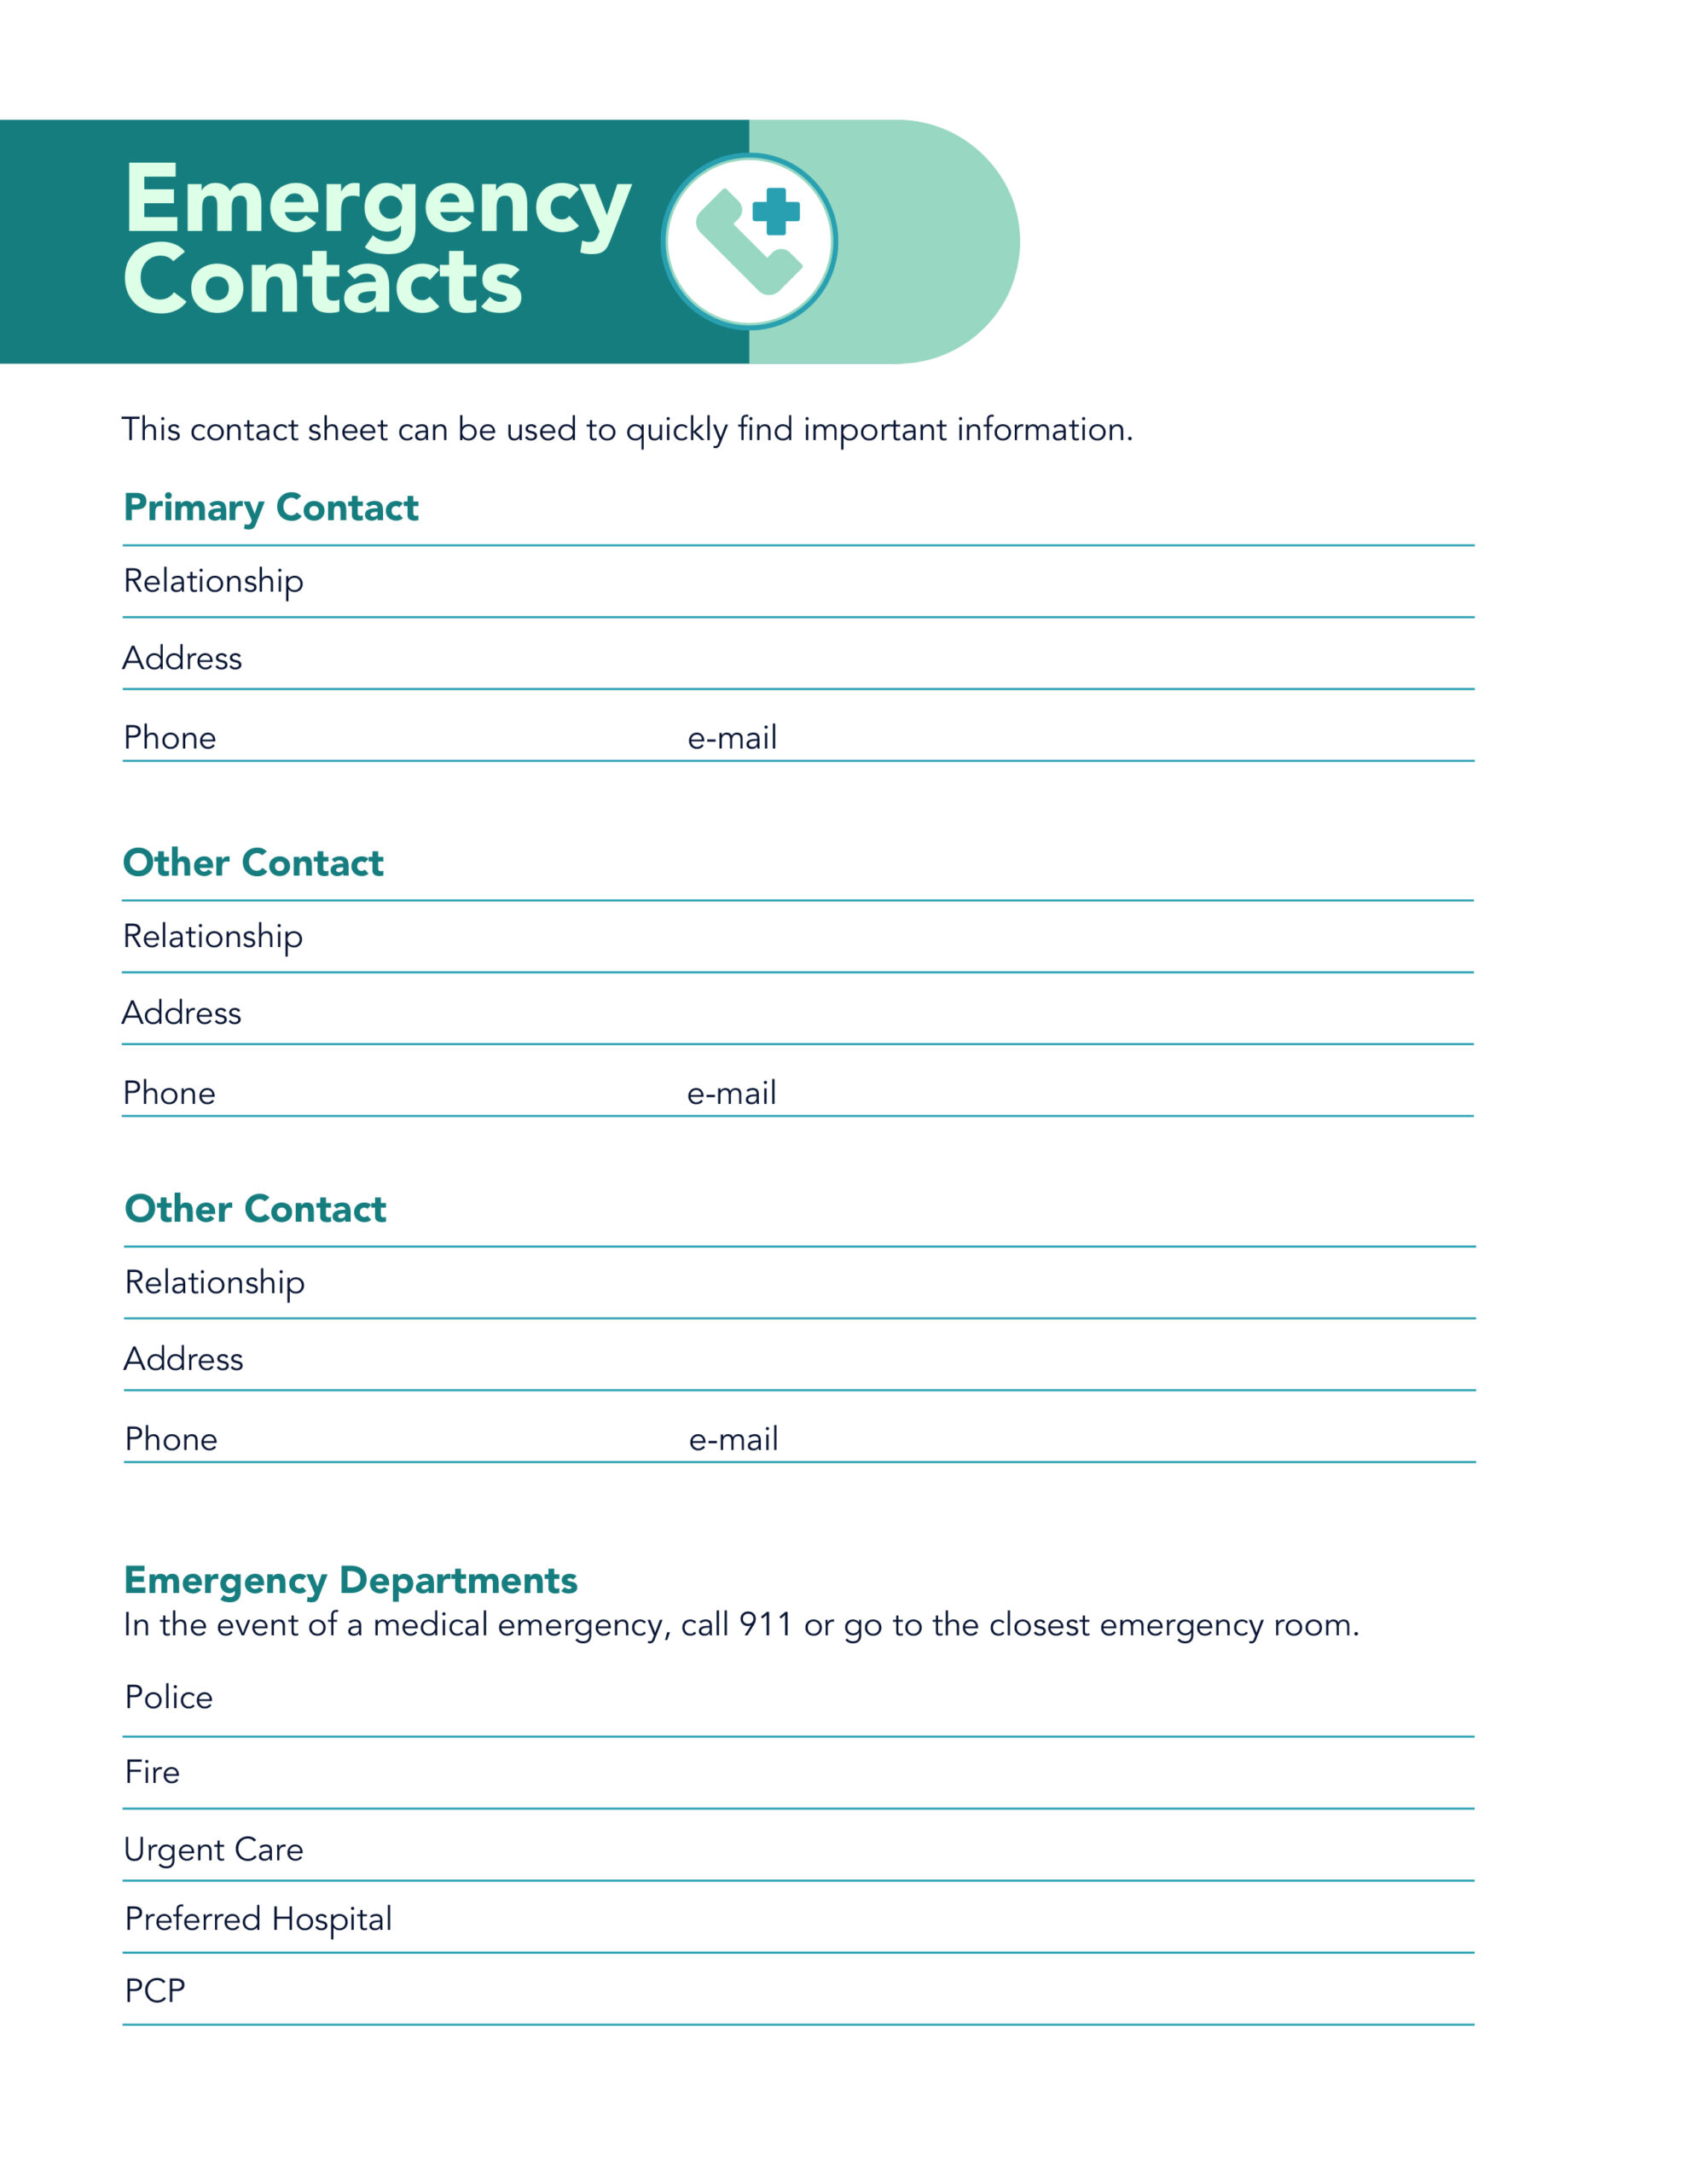 EMERGENCY-CONTACTS